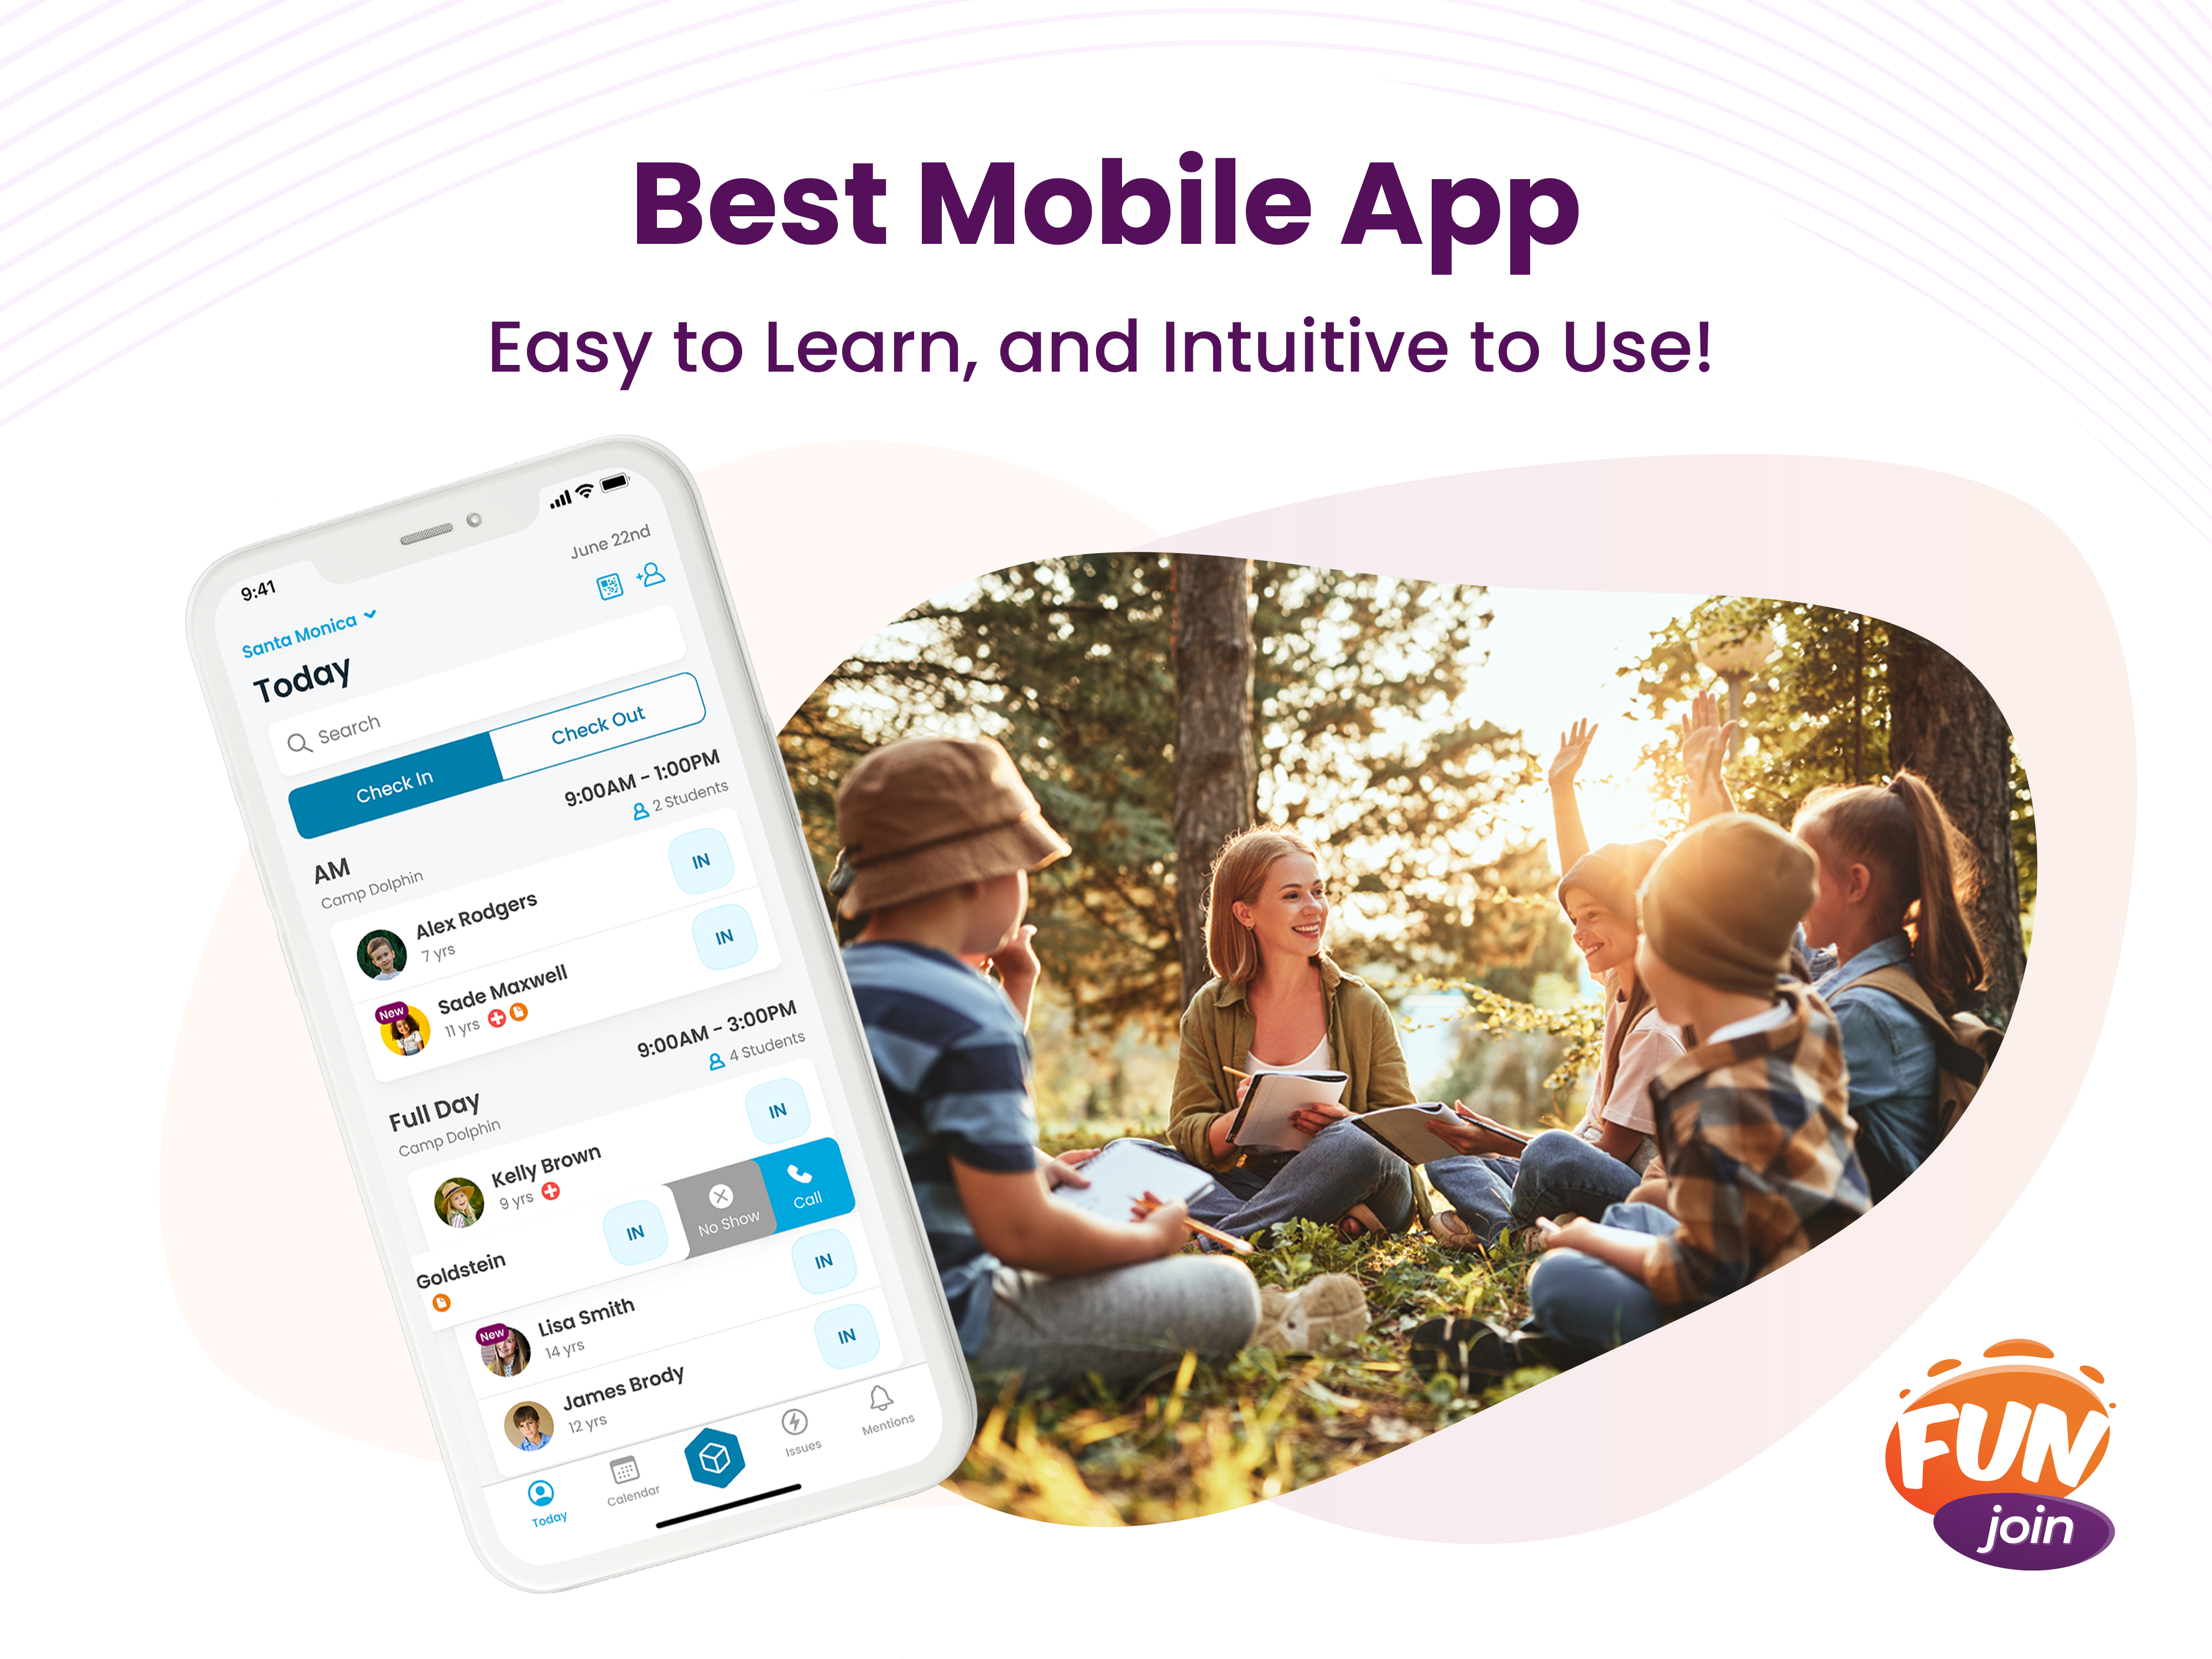 FunJoin offers the best mobile app in the industry, renowned for its simplicity and intuitiveness. It's designed to be easily learned and used, providing a user-friendly interface that streamlines the management of your business operations.